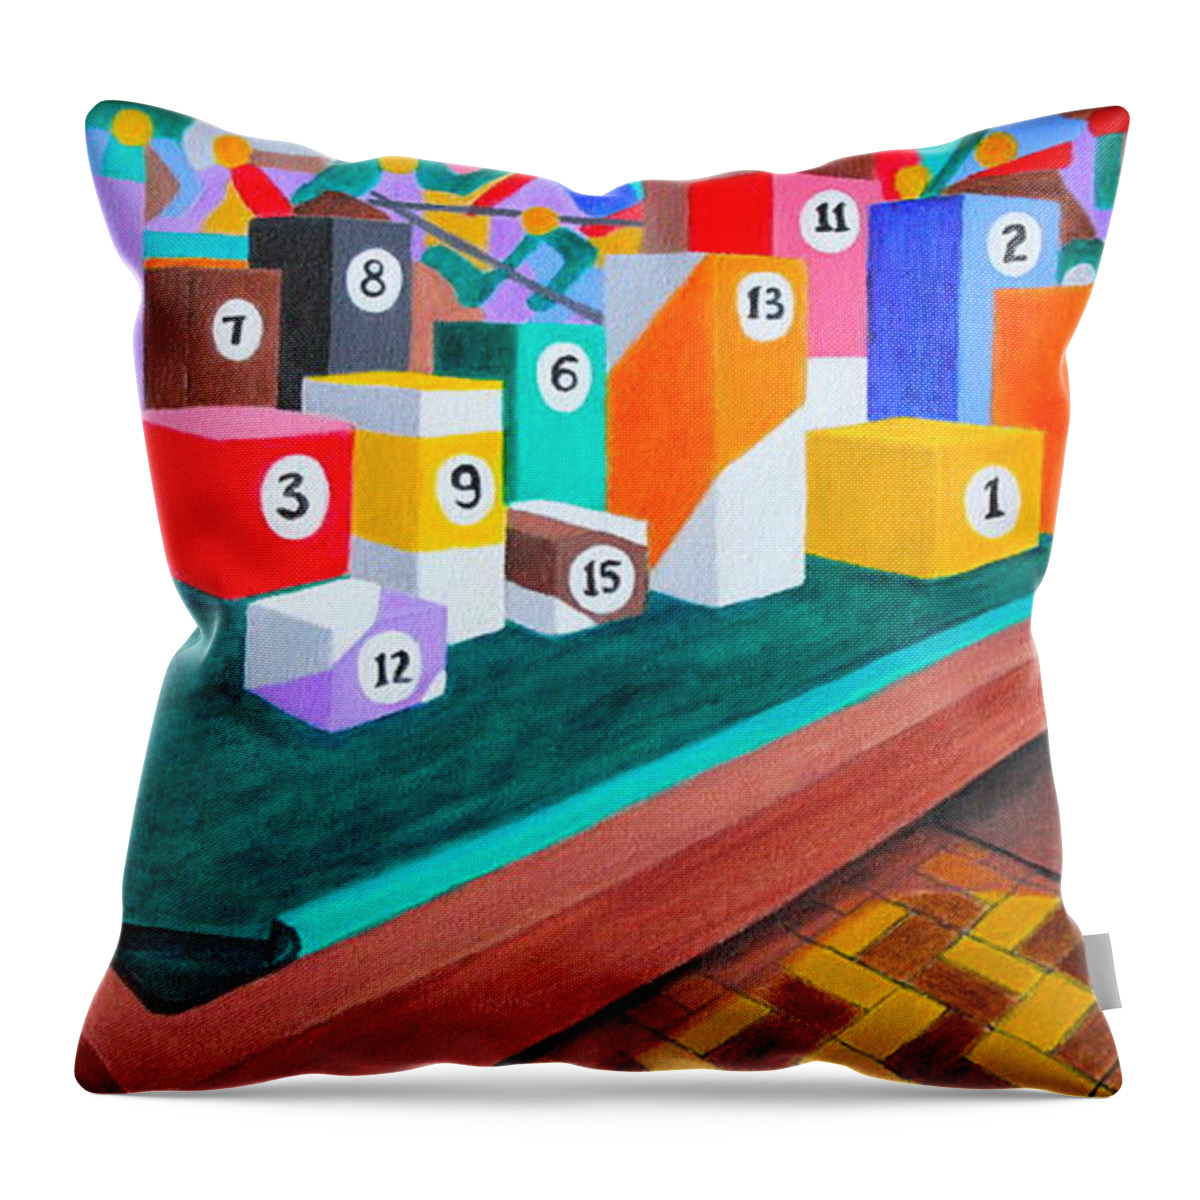 All Apparels Throw Pillow featuring the painting Billiard Table by Lorna Maza